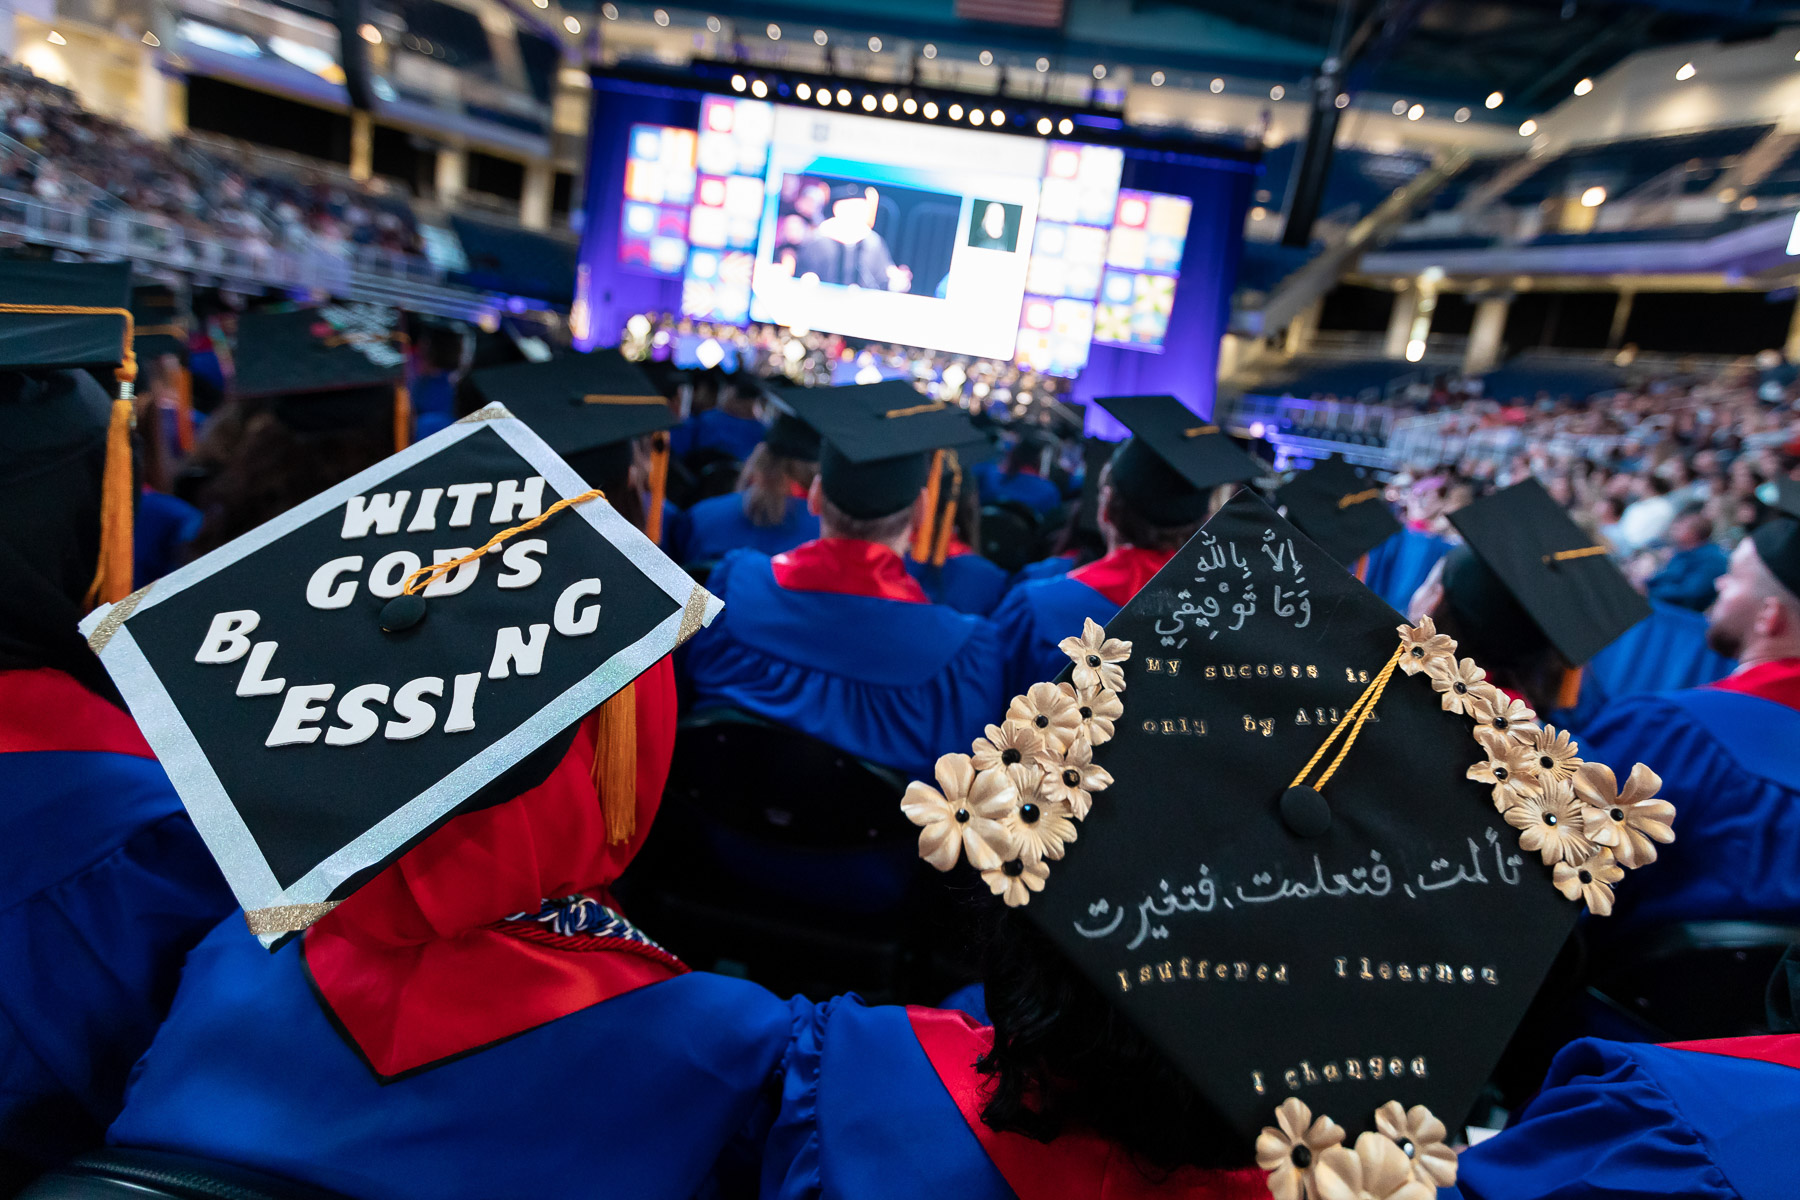 Best of 2019 Commencement 